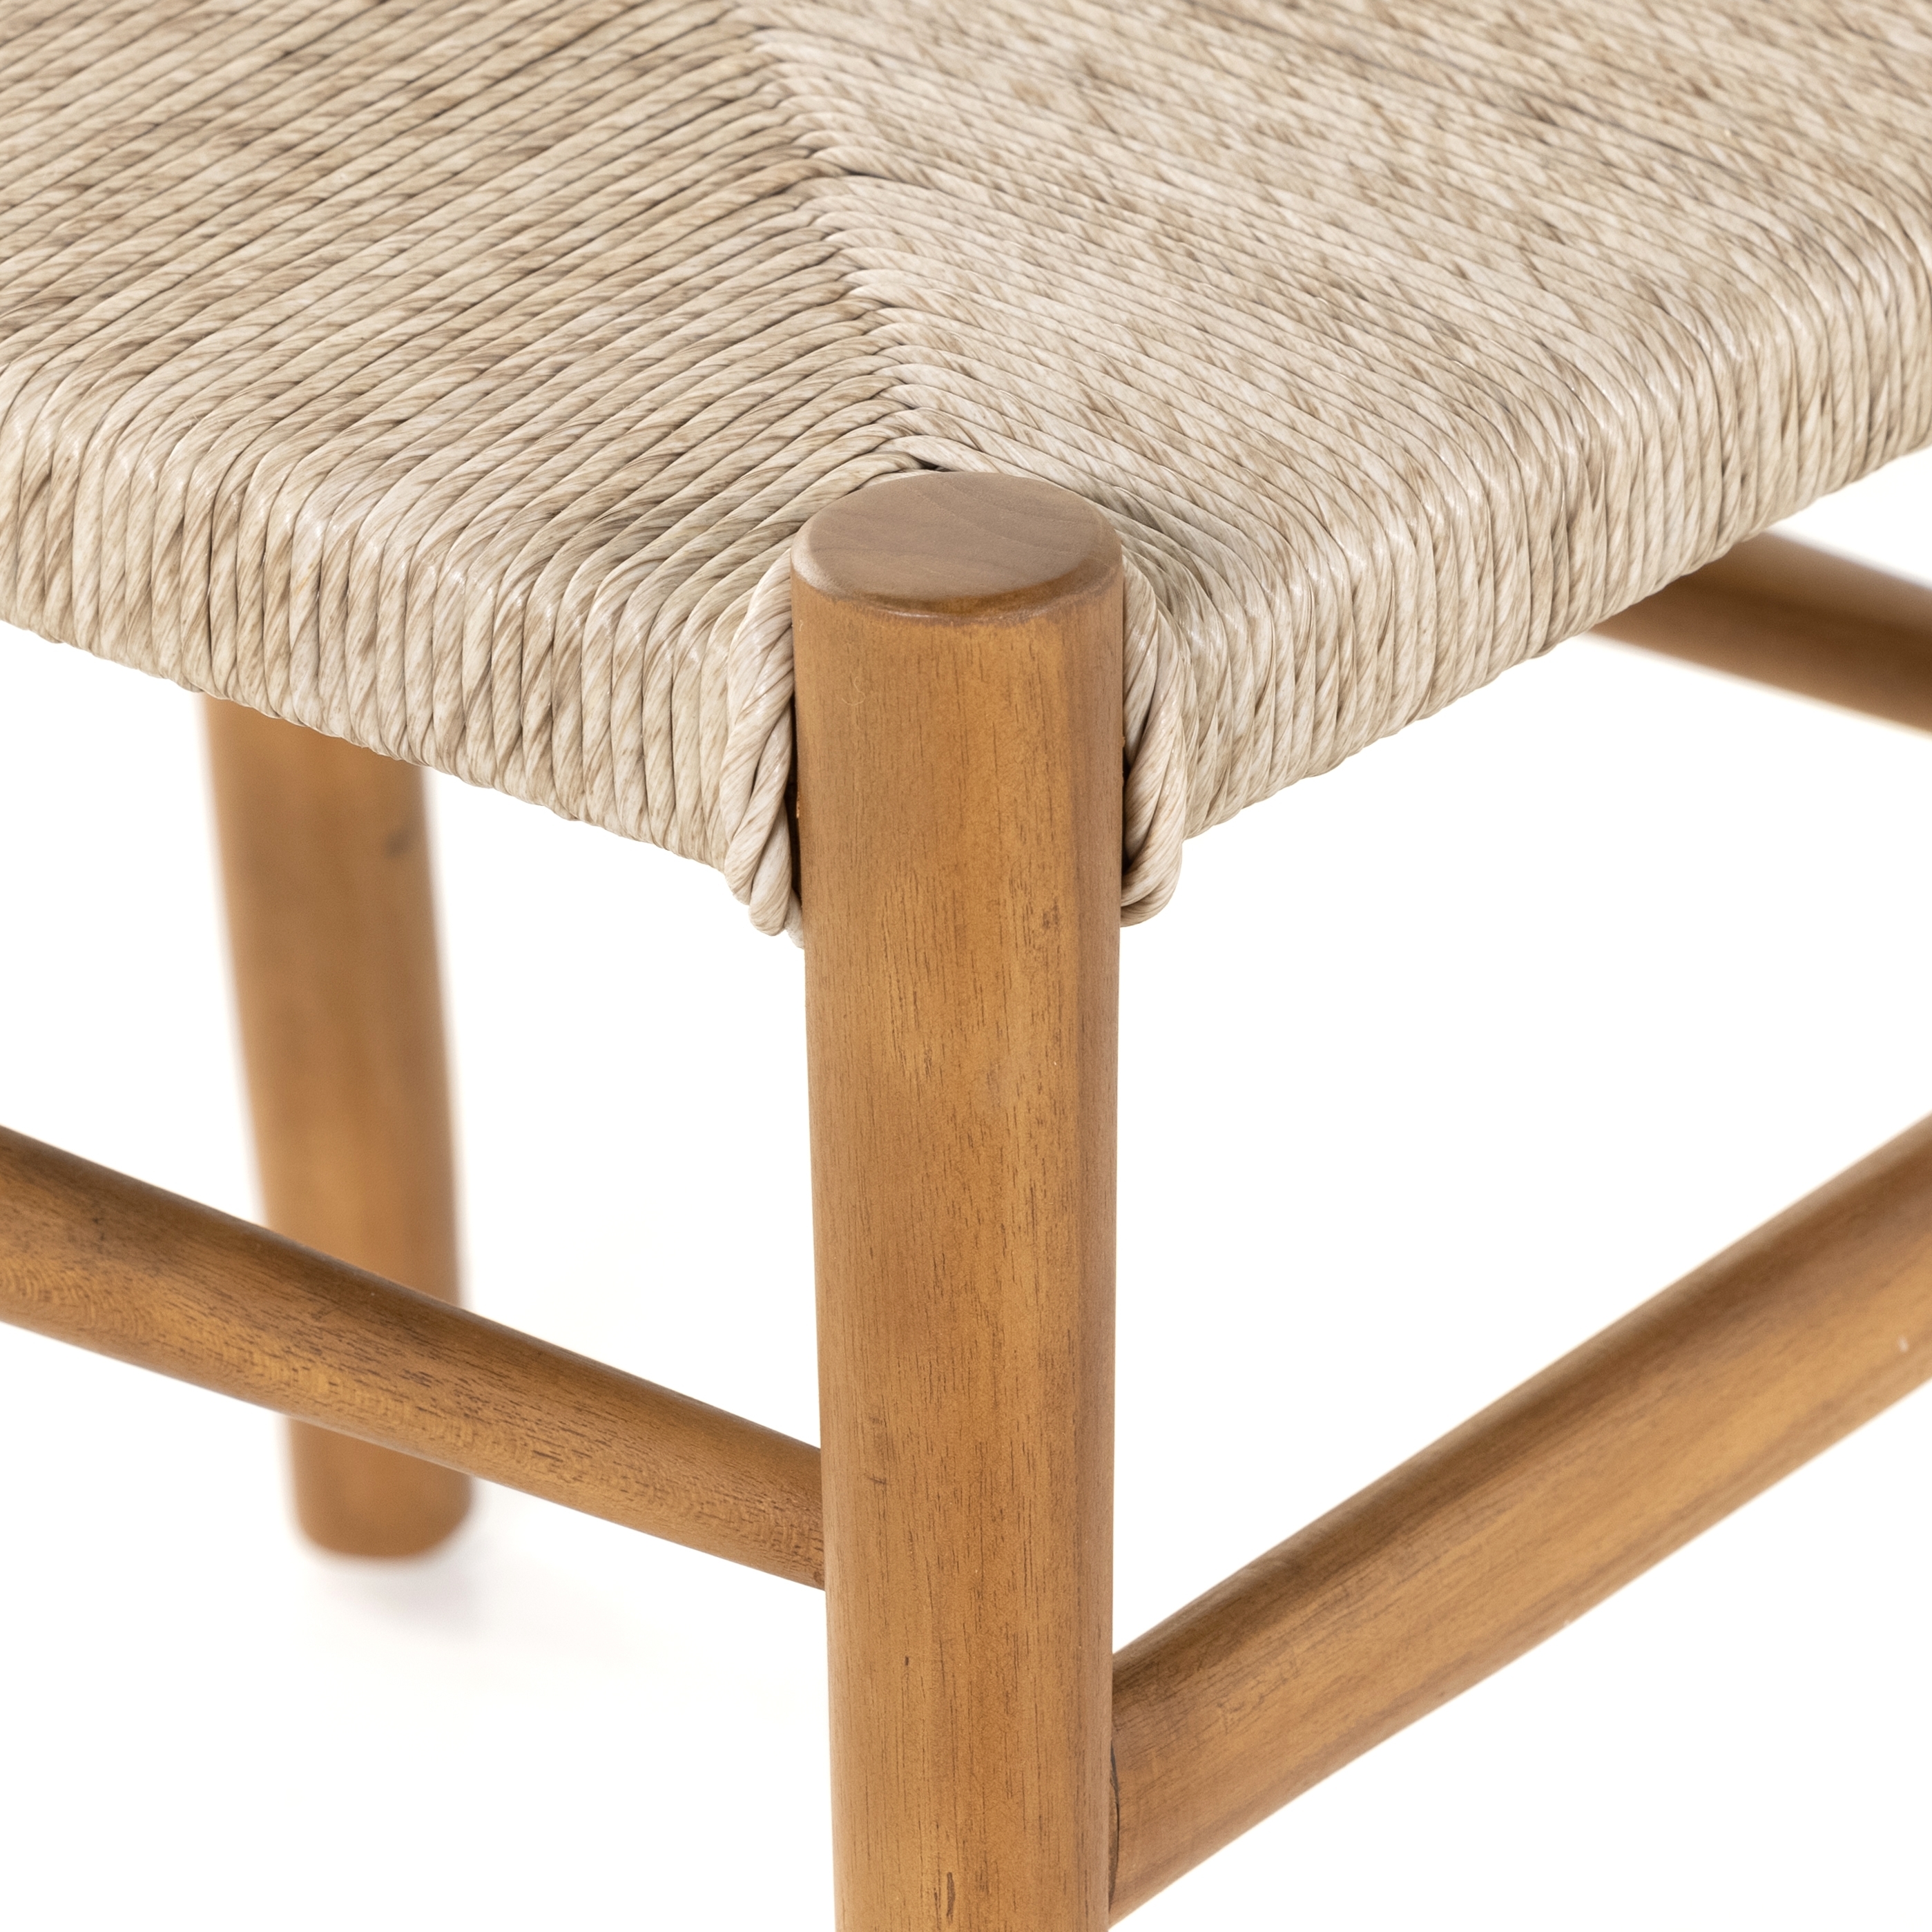 Muestra Dining Chair-Natural - Image 8